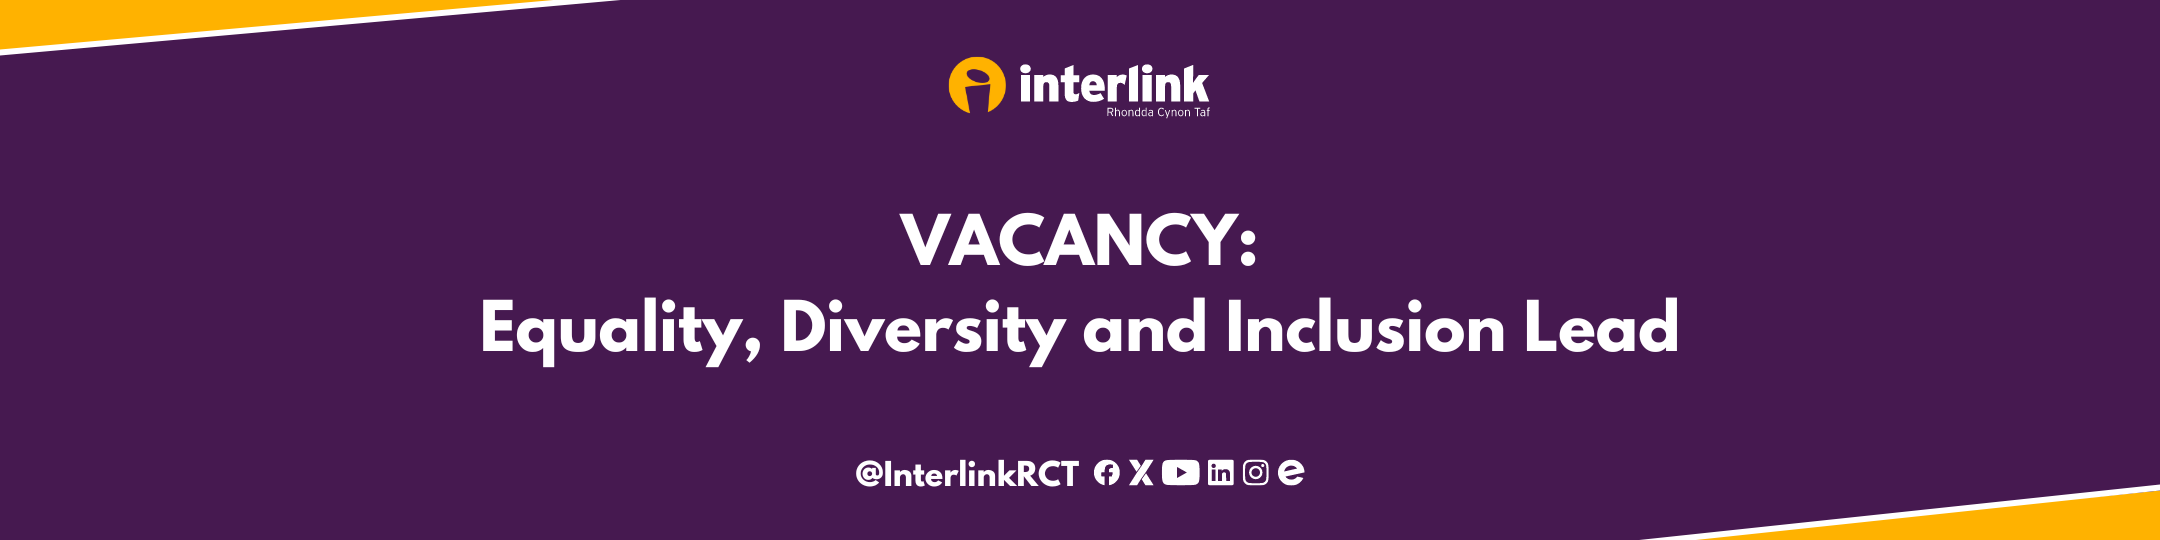 Vacancy: Equality, Diversity and Inclusion (EDI) Lead